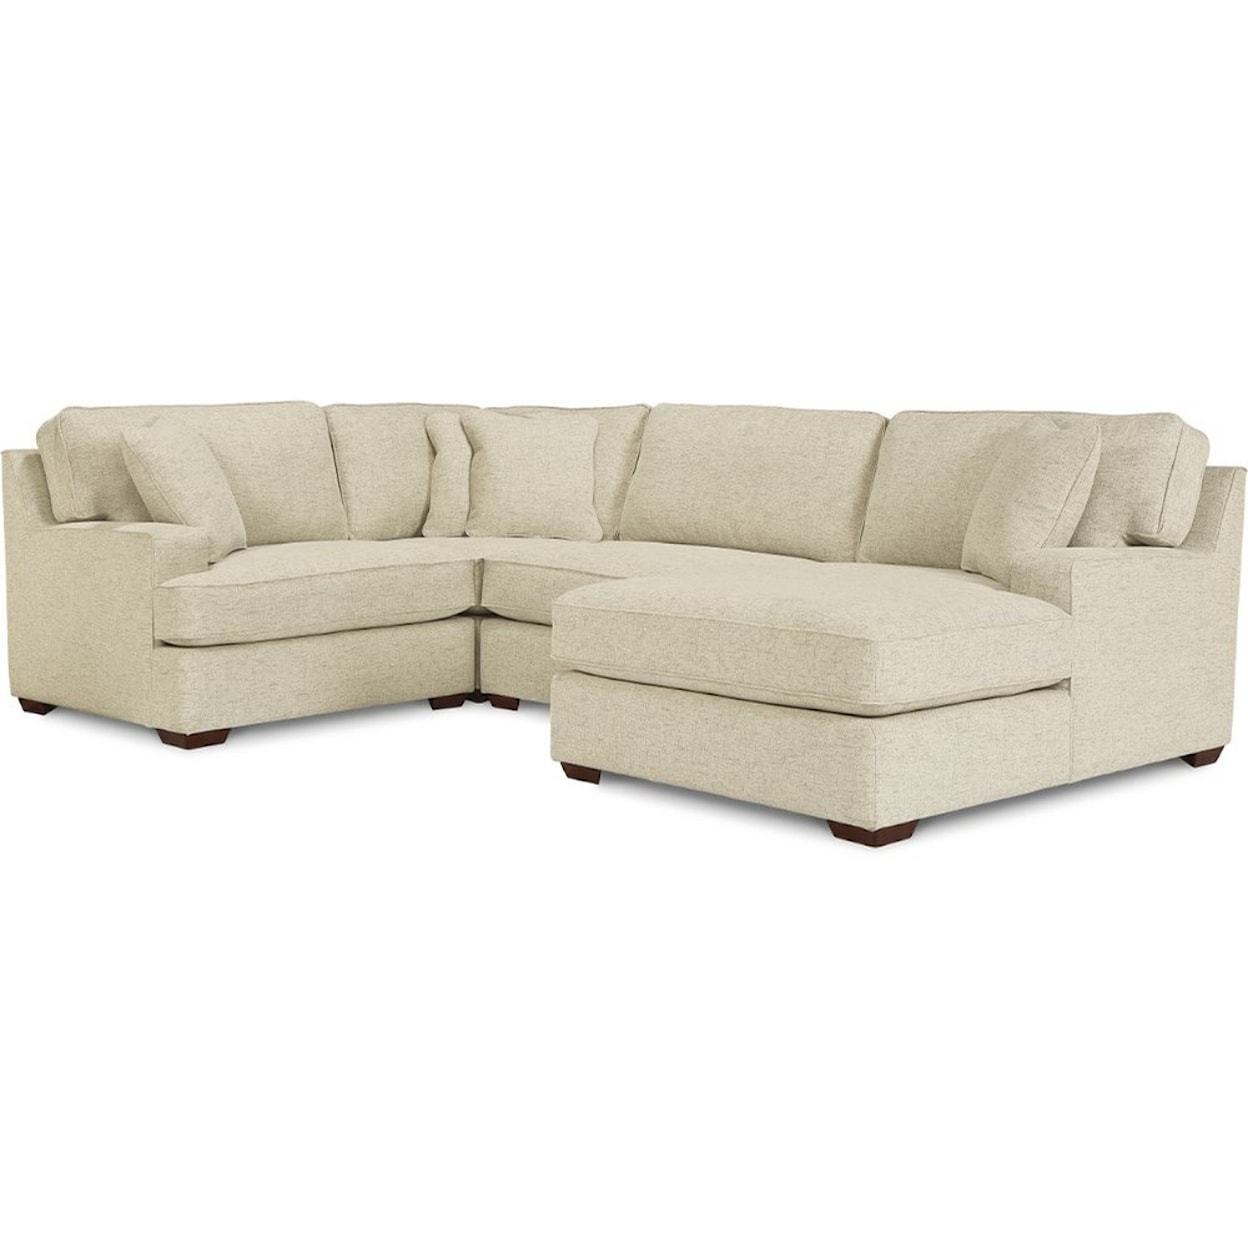 La-Z-Boy Paxton 3-Seat Sectional Sofa w/ Right Chaise